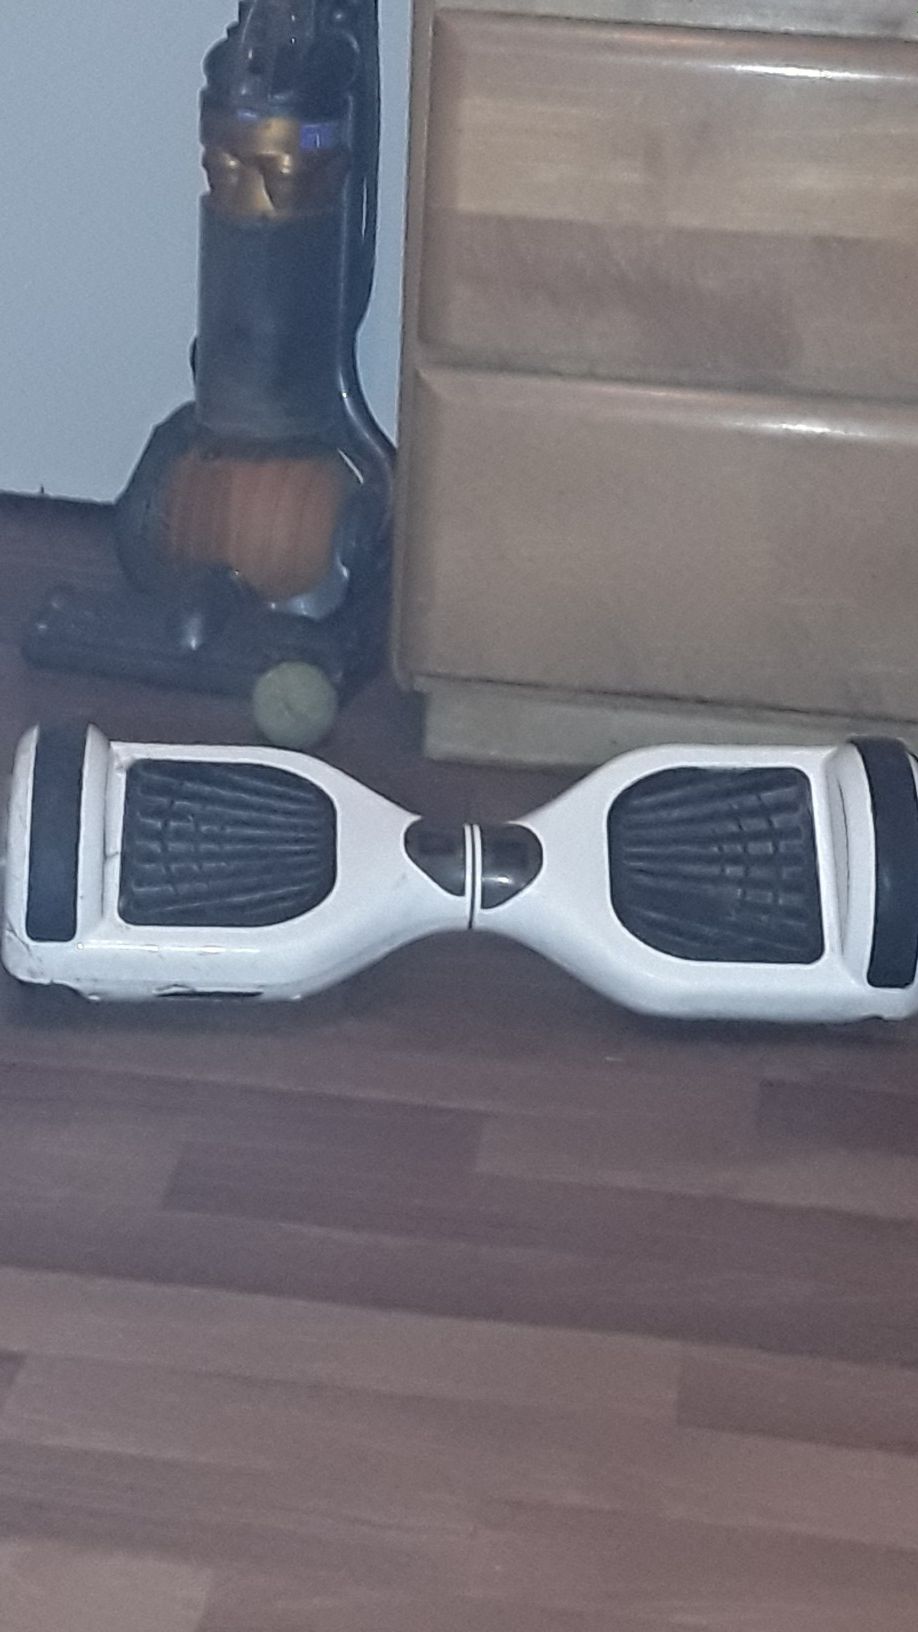 Dyson or hoverboard